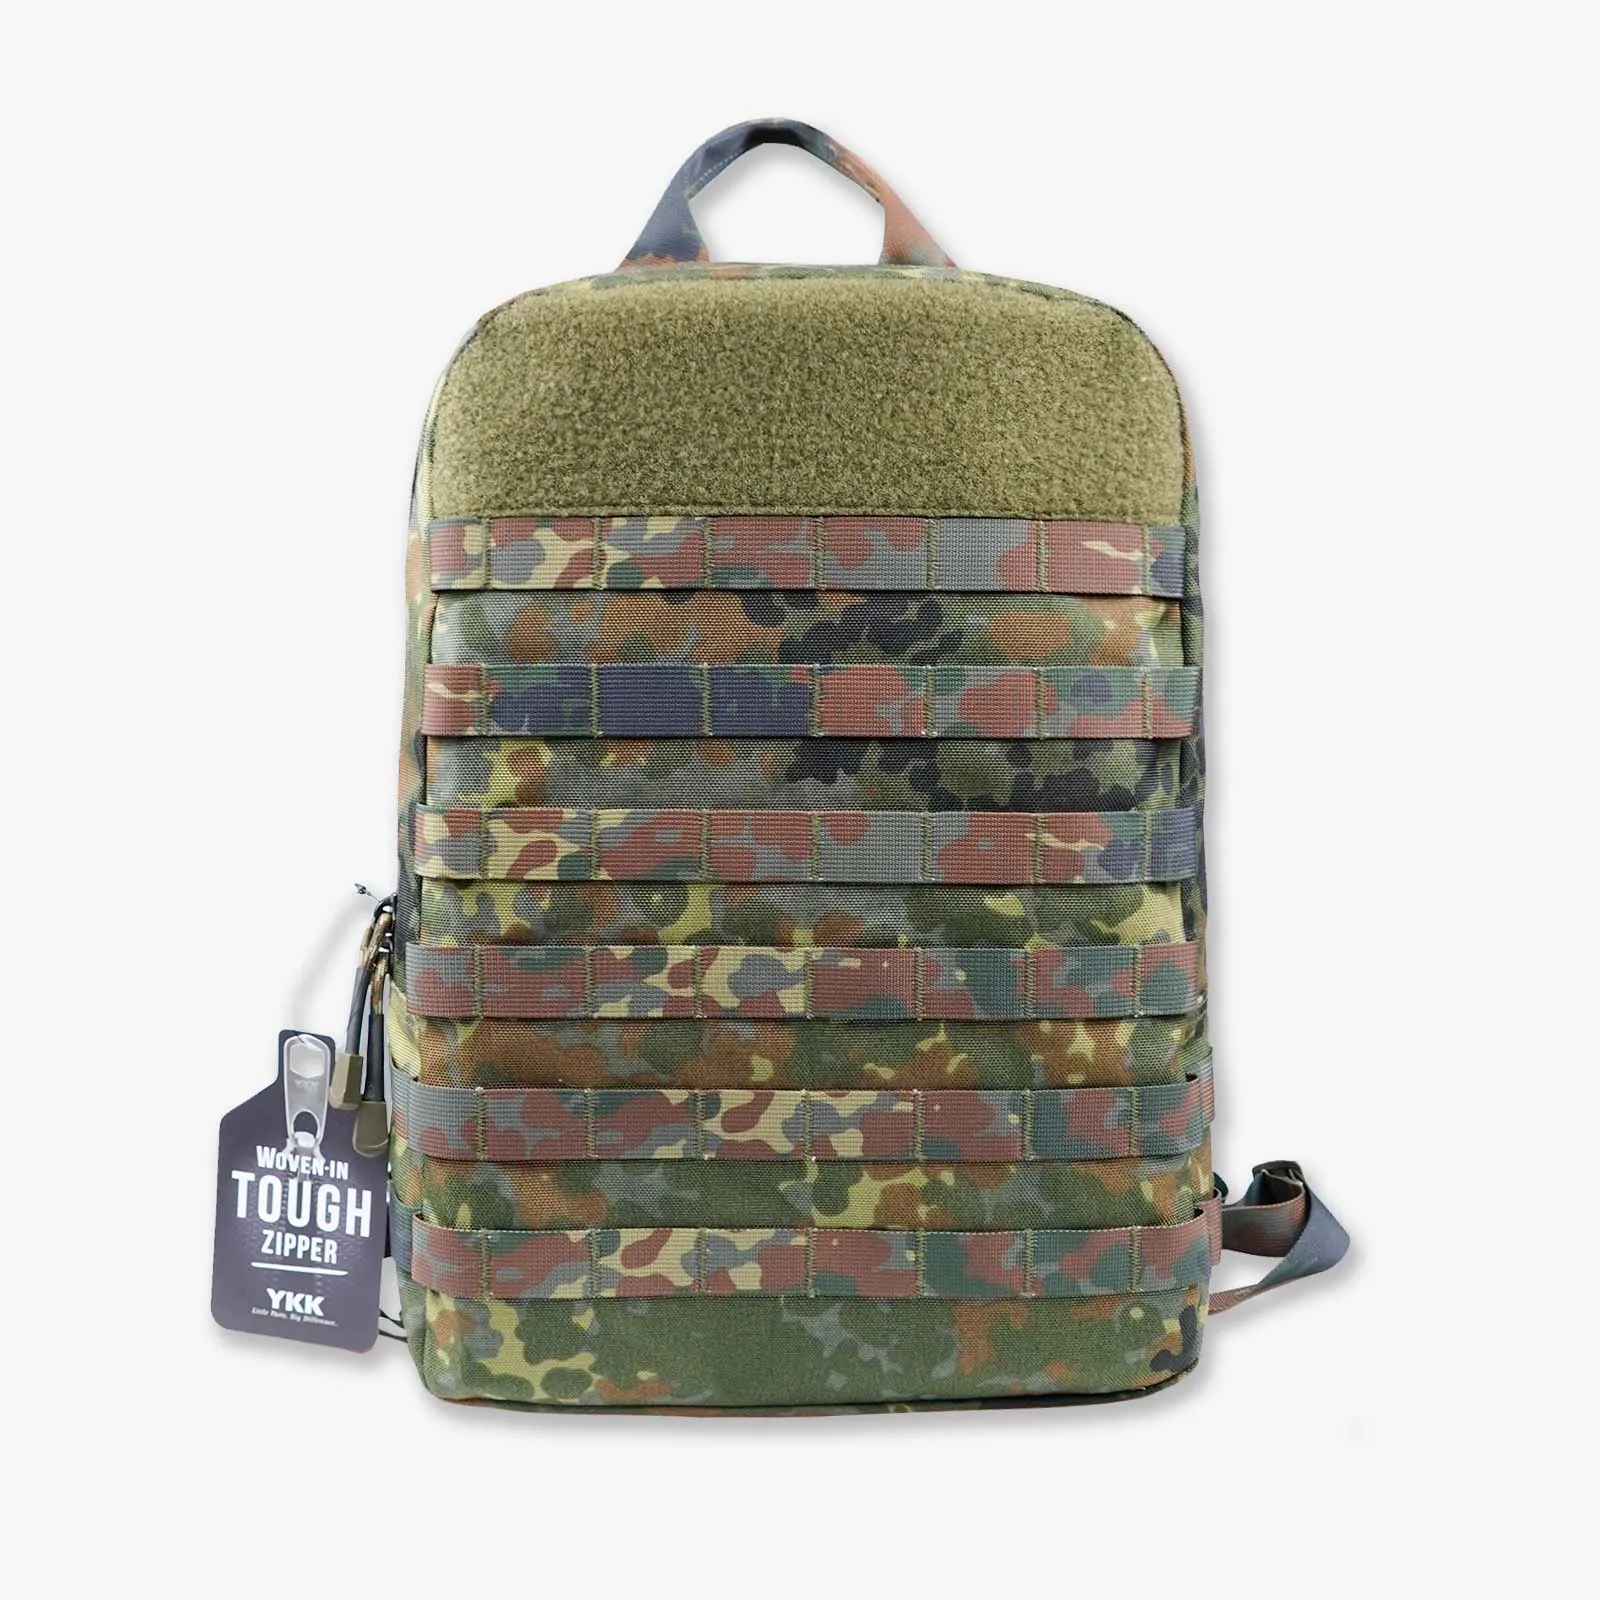 2.0 Tactical Attack Backpack Outdoor Camping Travel Computer Bag